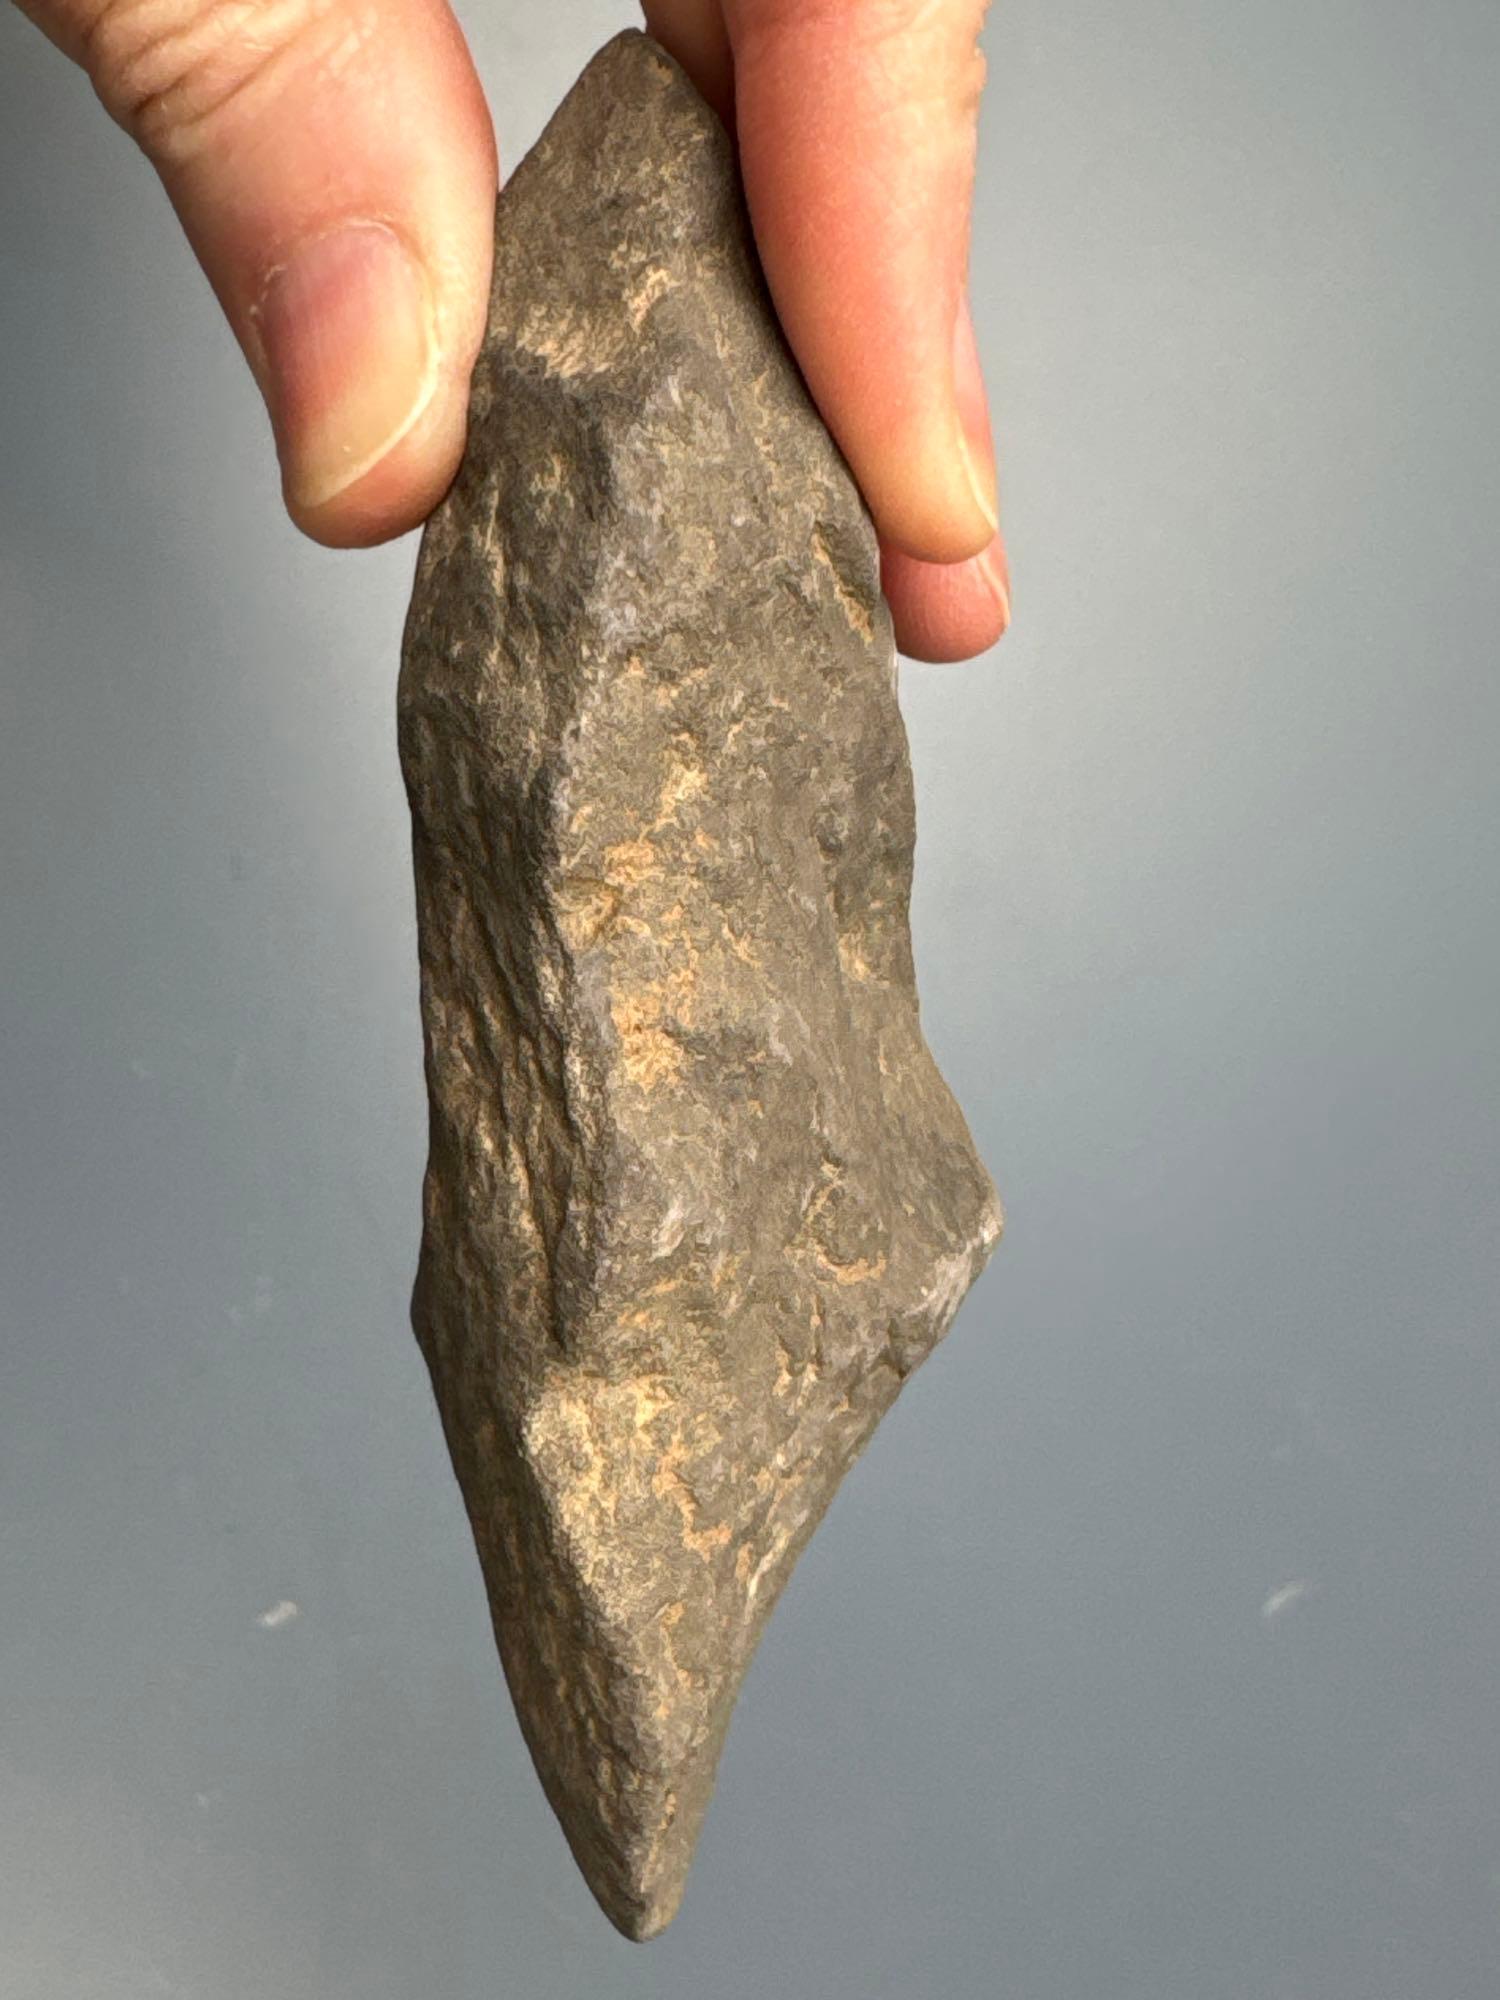 Lot of 3 Tools, Celt, Flaked Celt and Preform, Longest is 5 1/4", Found in Cecil Co., Maryland